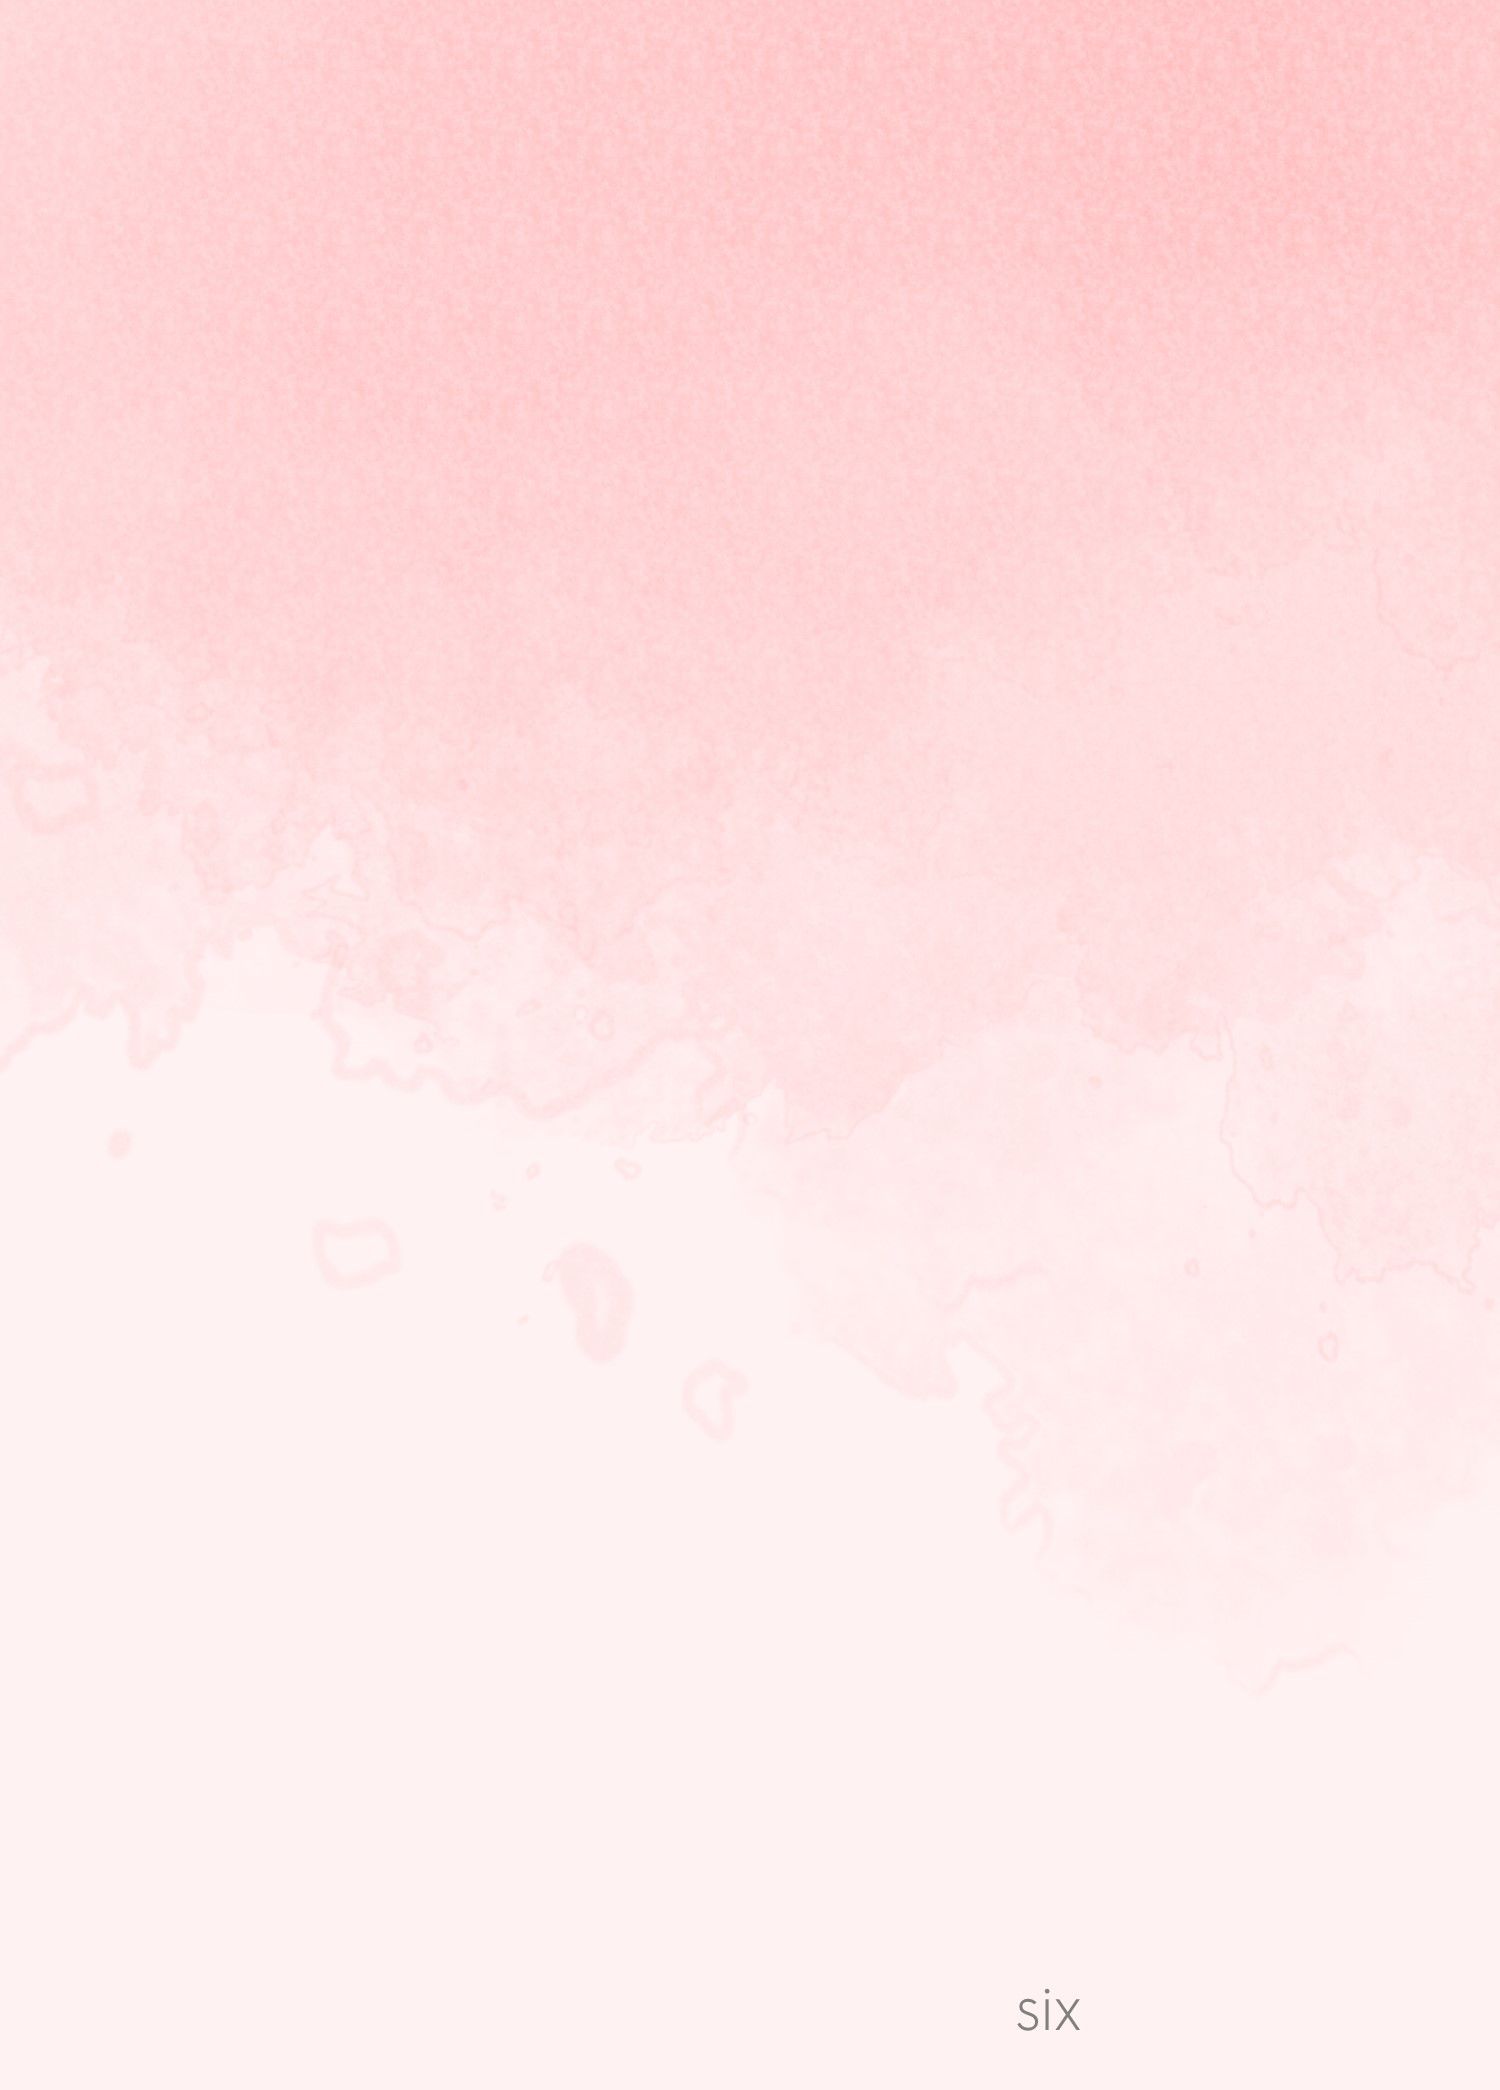 128 1284964 always need pink watercolour backgrounds pink peach watercolor min